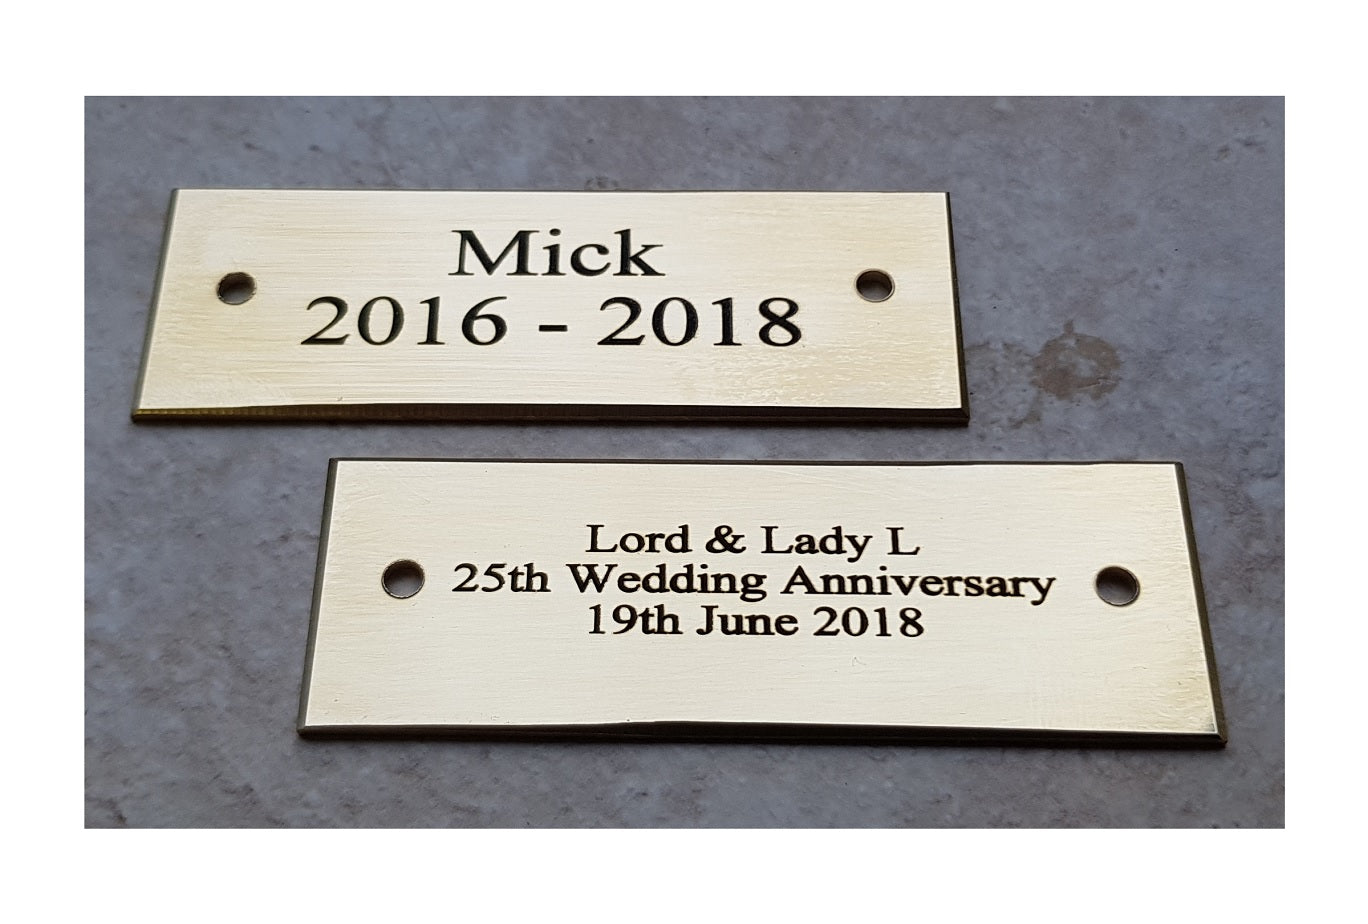 Personalised Engraved Polished Brass Plaques - NO MOUNTING HOLES - EIGHTEEN Size Options